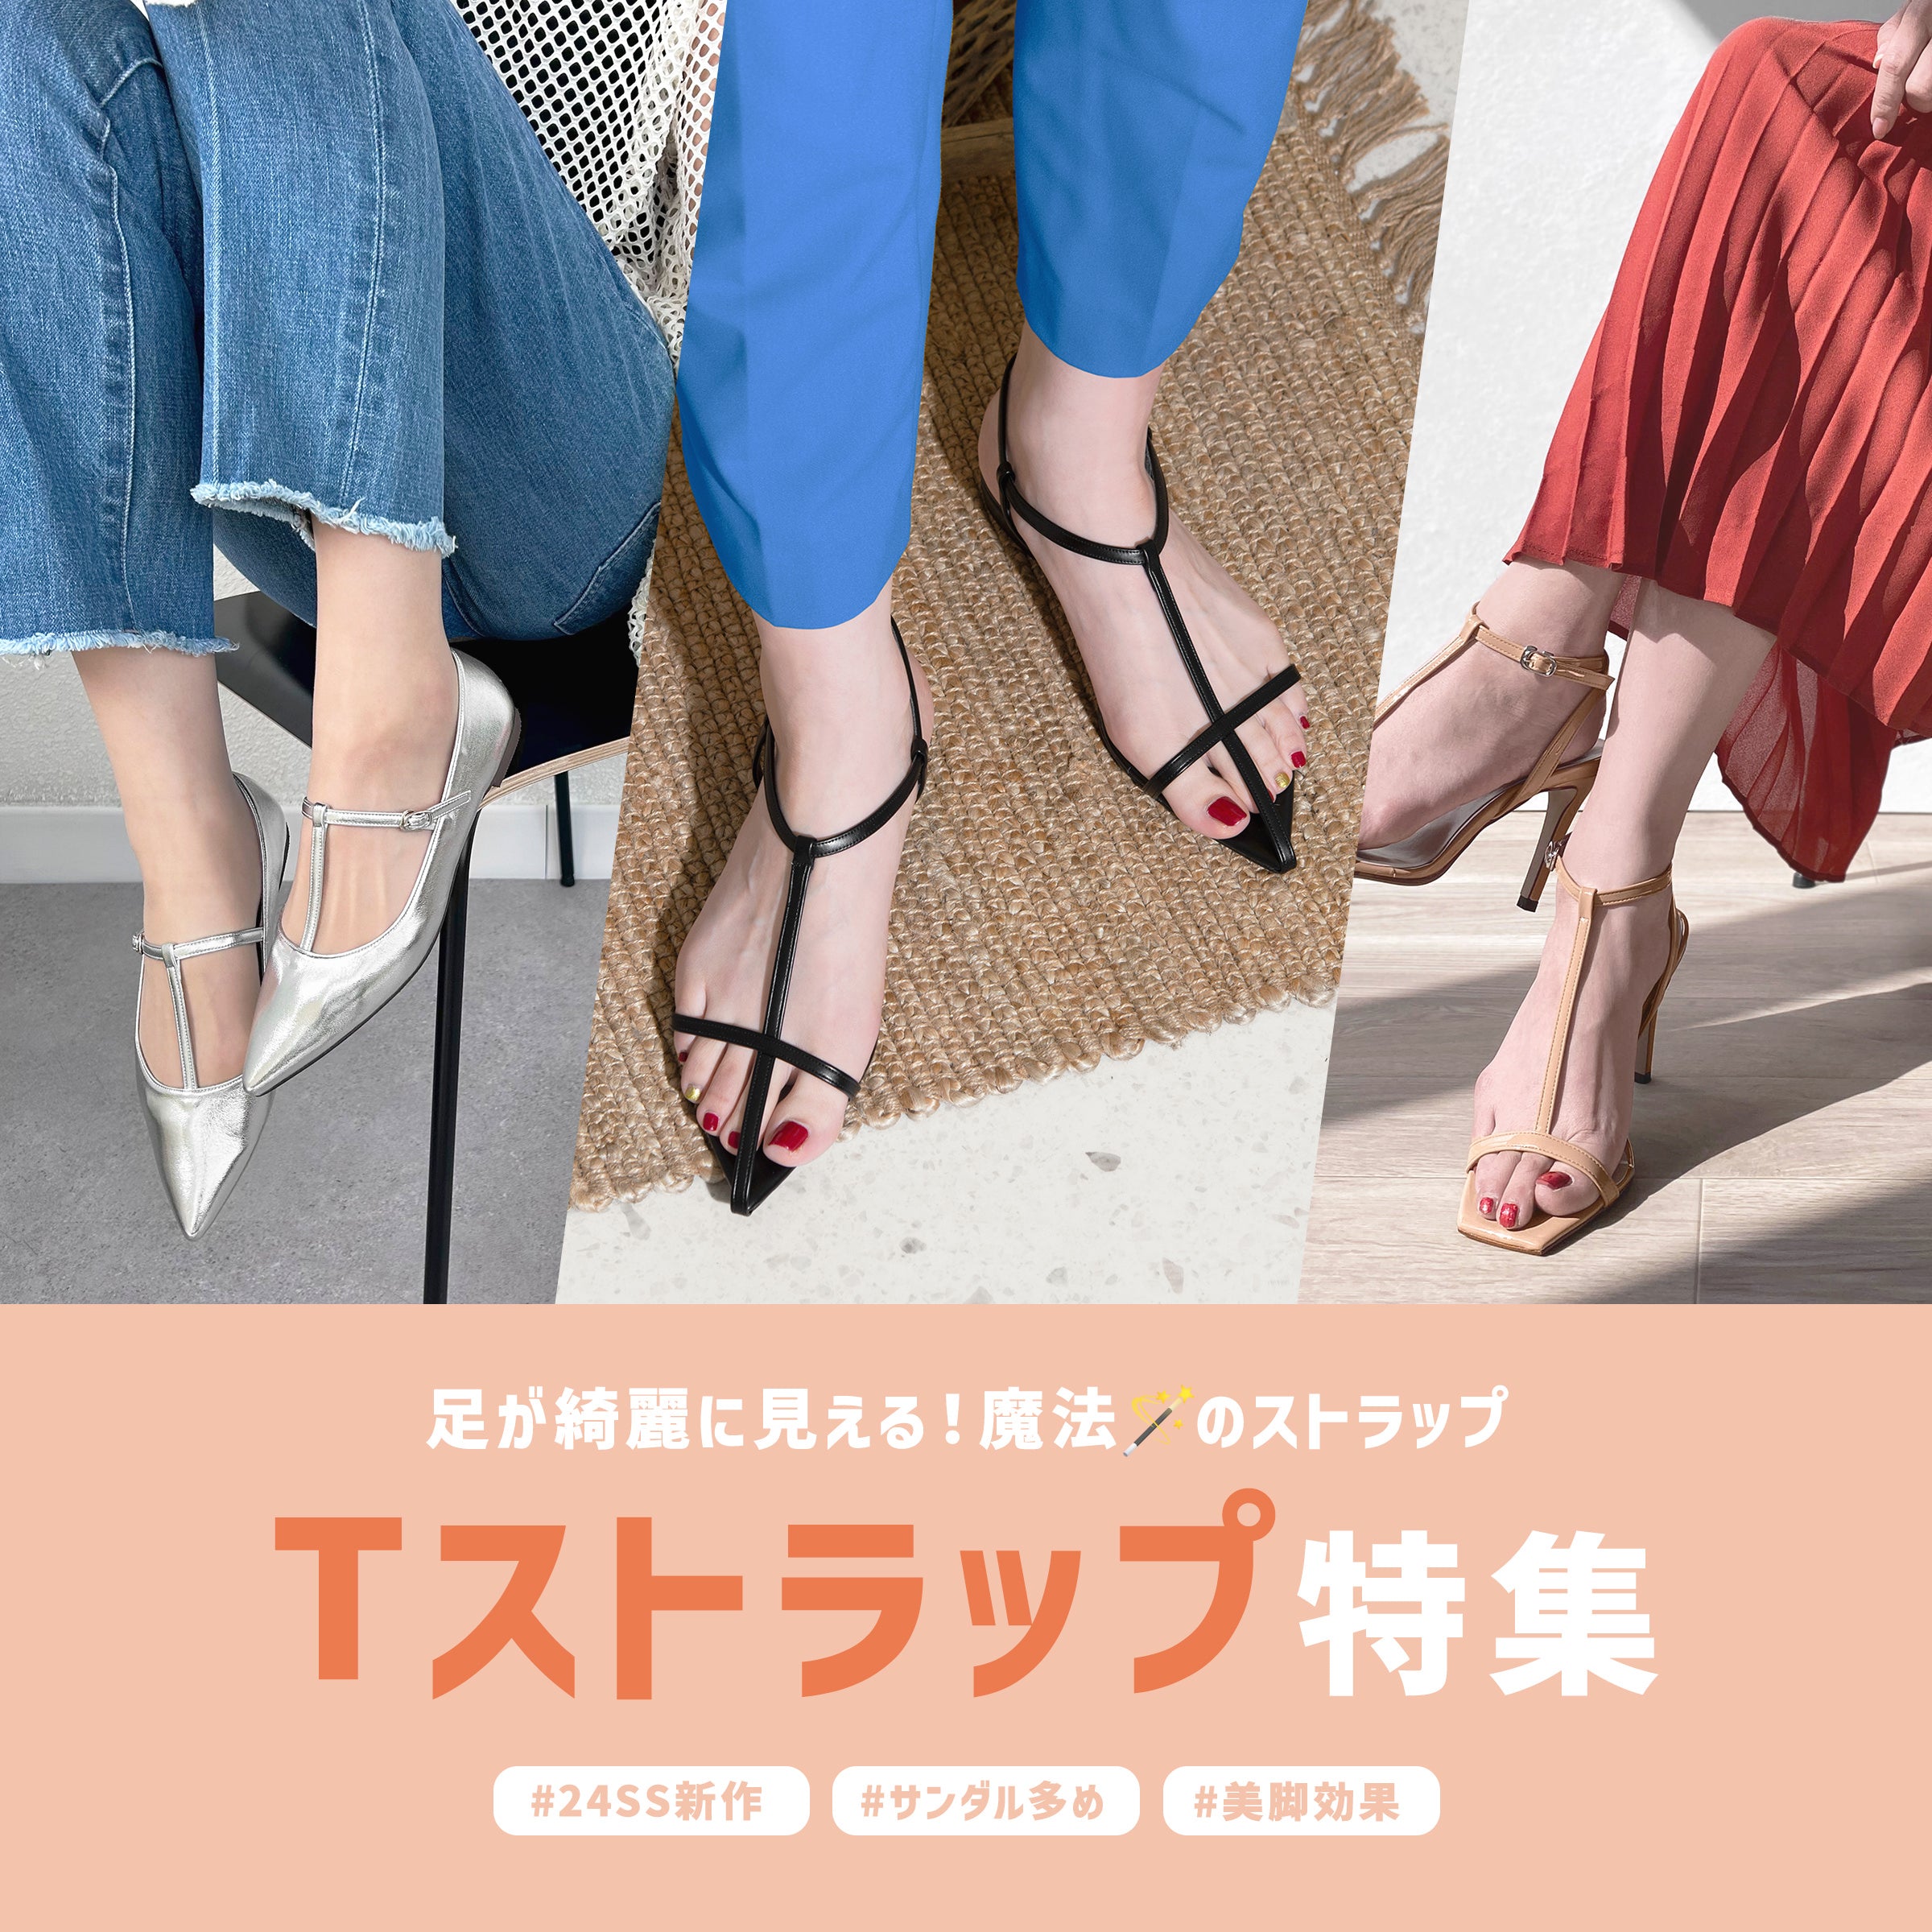 Your feet look beautiful! T strap special feature